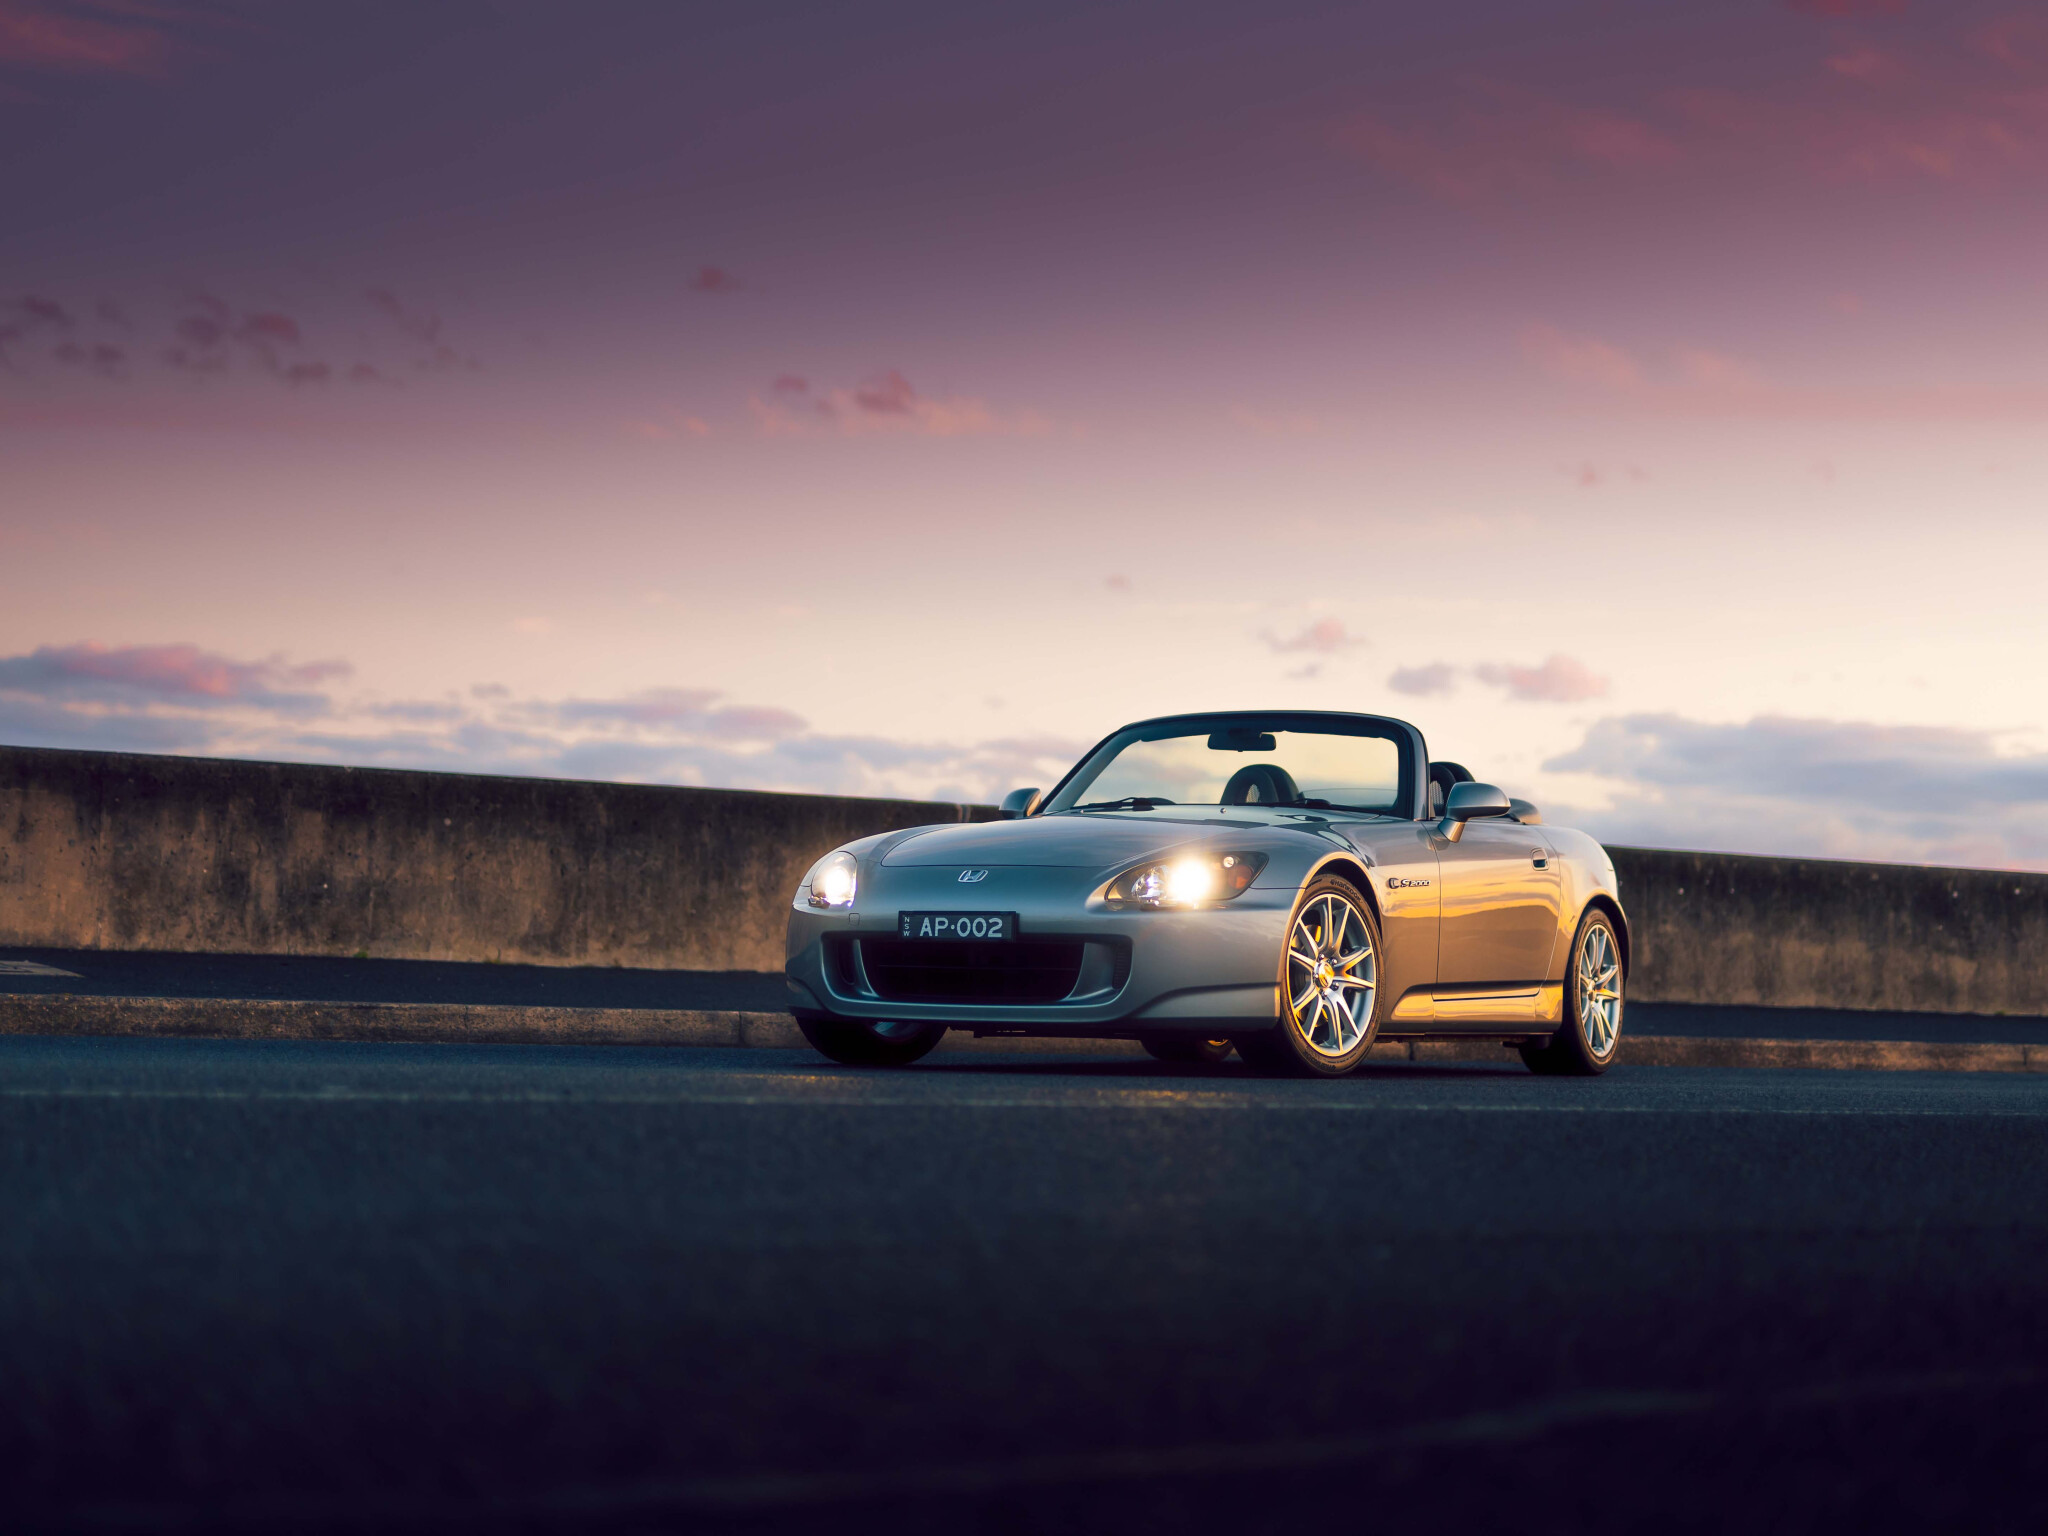 Why The Honda S2000 Remains A Timeless Masterpiece - 20+ Years Later